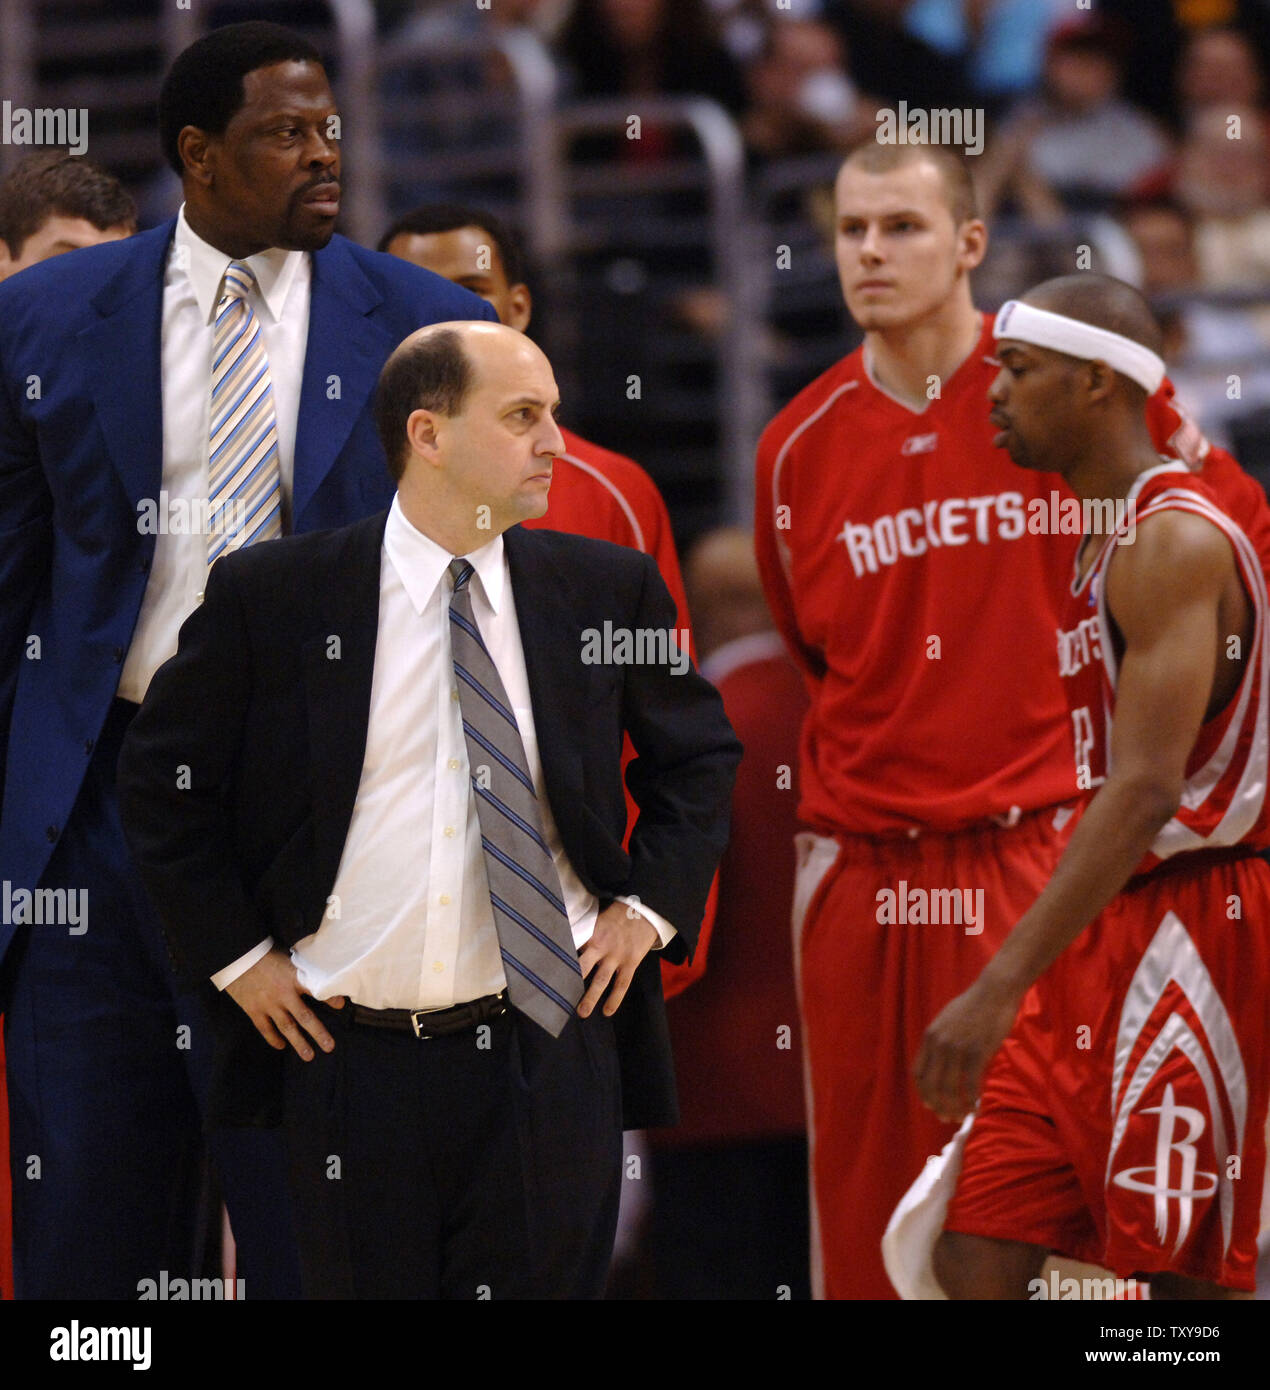 Houston Rockets' head coach Jeff Van Gundy, foreground, stares down the referee during a time out in the fourth quarter of their NBA basketball game against the Los Angeles Lakers at Staples Center in Los Angeles, California on April 2, 2006. The Lakers defeated the Rockets 104-88.  Looking on is assistant coach Patrick Ewing , rear, left. (UPI Photo/Jim Ruymen) Stock Photo